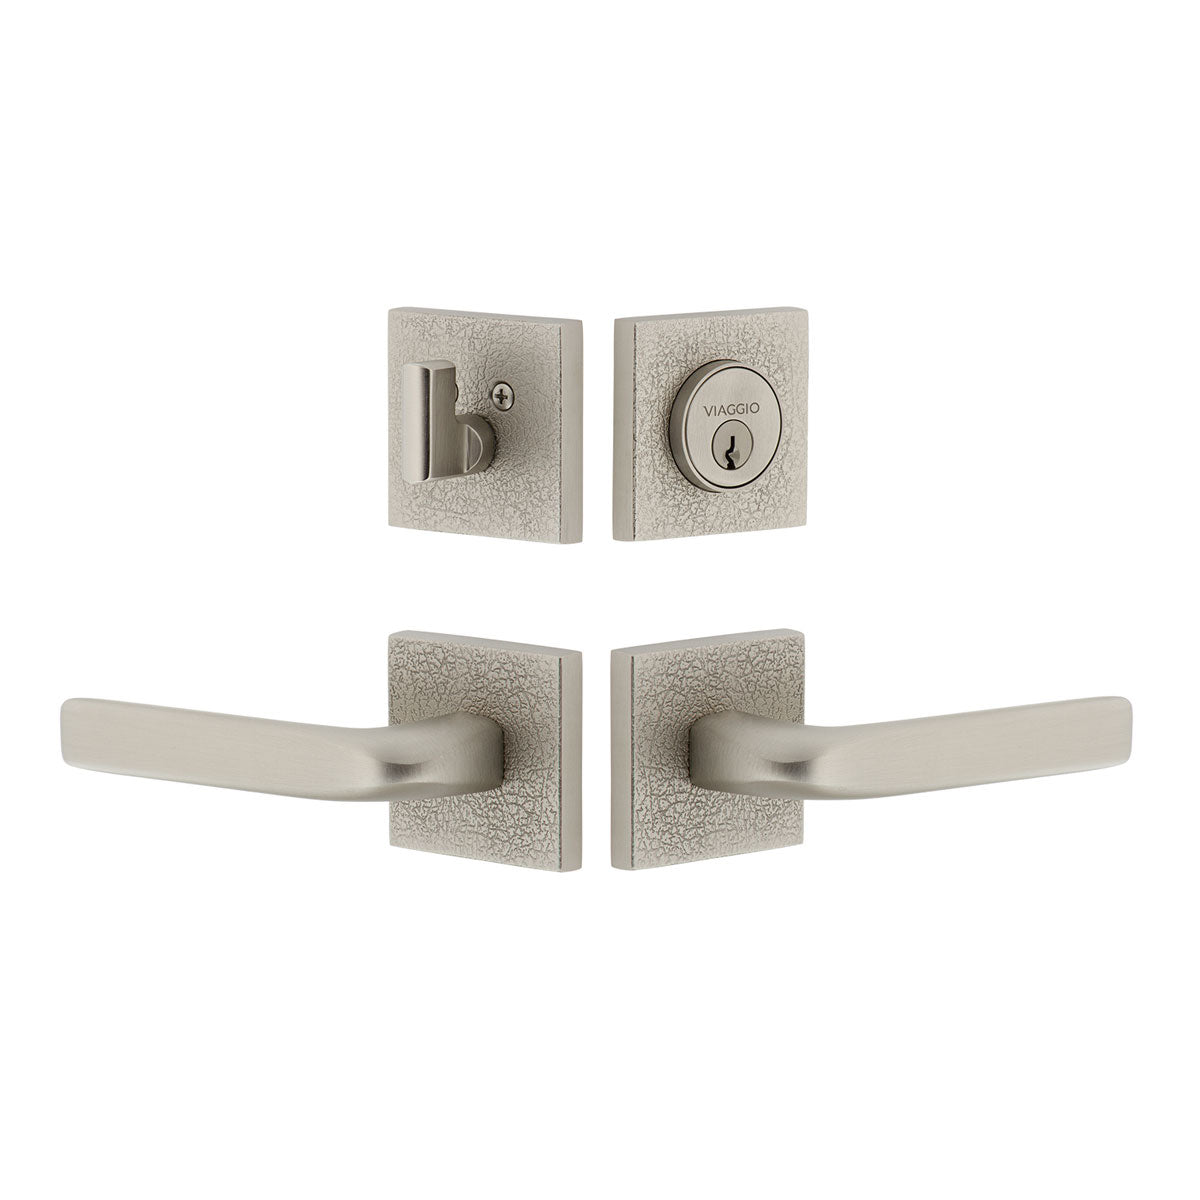 Quadrato Leather Rosette Entry Set with Bella Lever in Satin Nickel